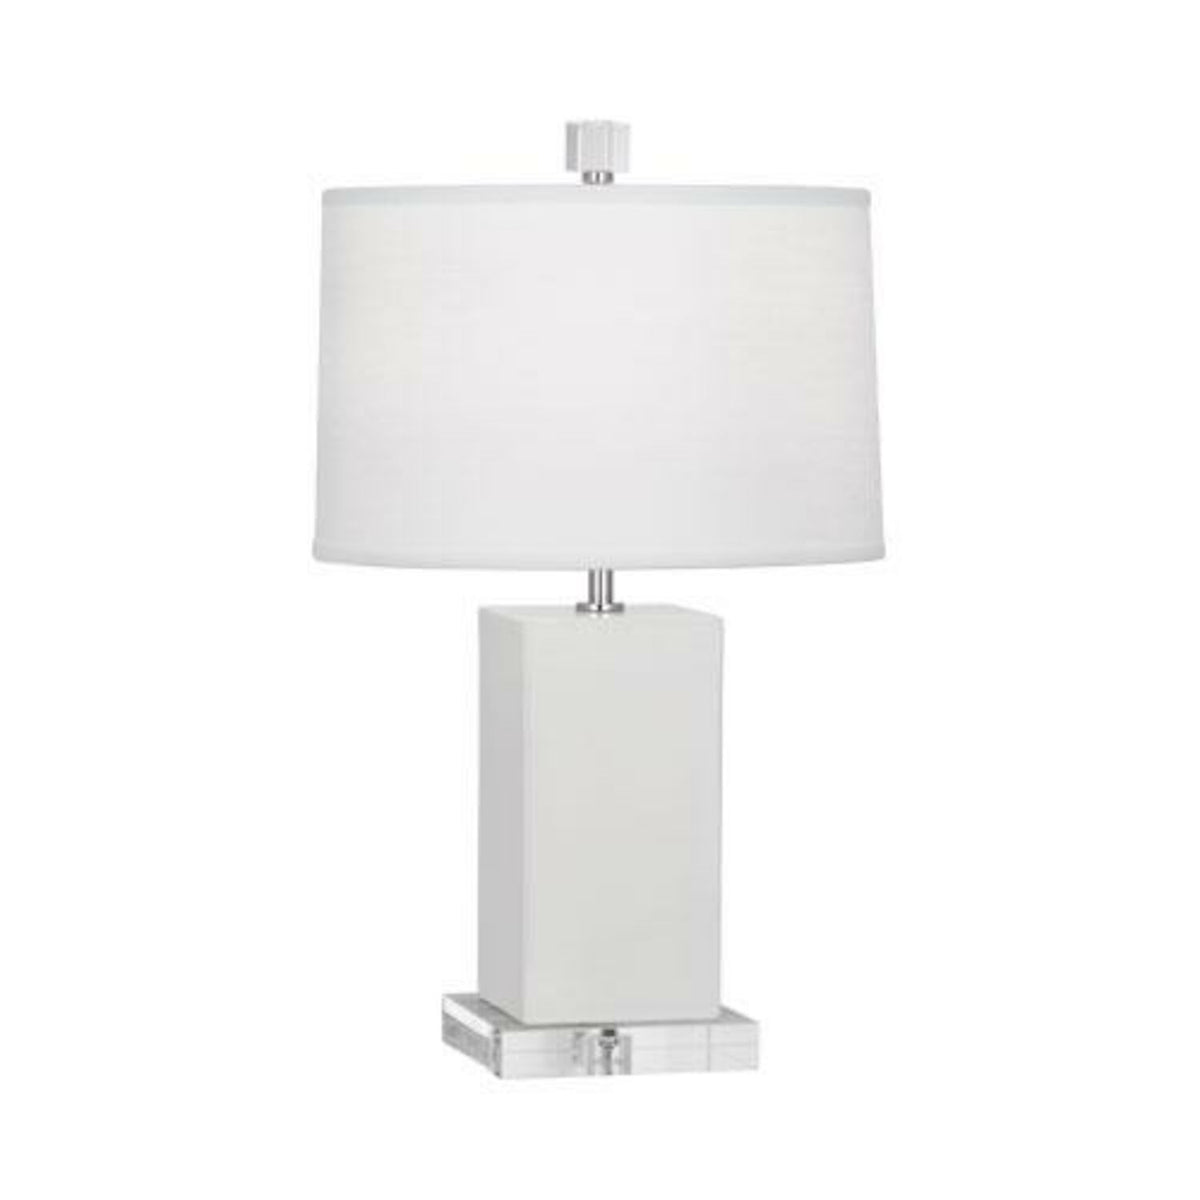 LILY HARVEY ACCENT LAMP